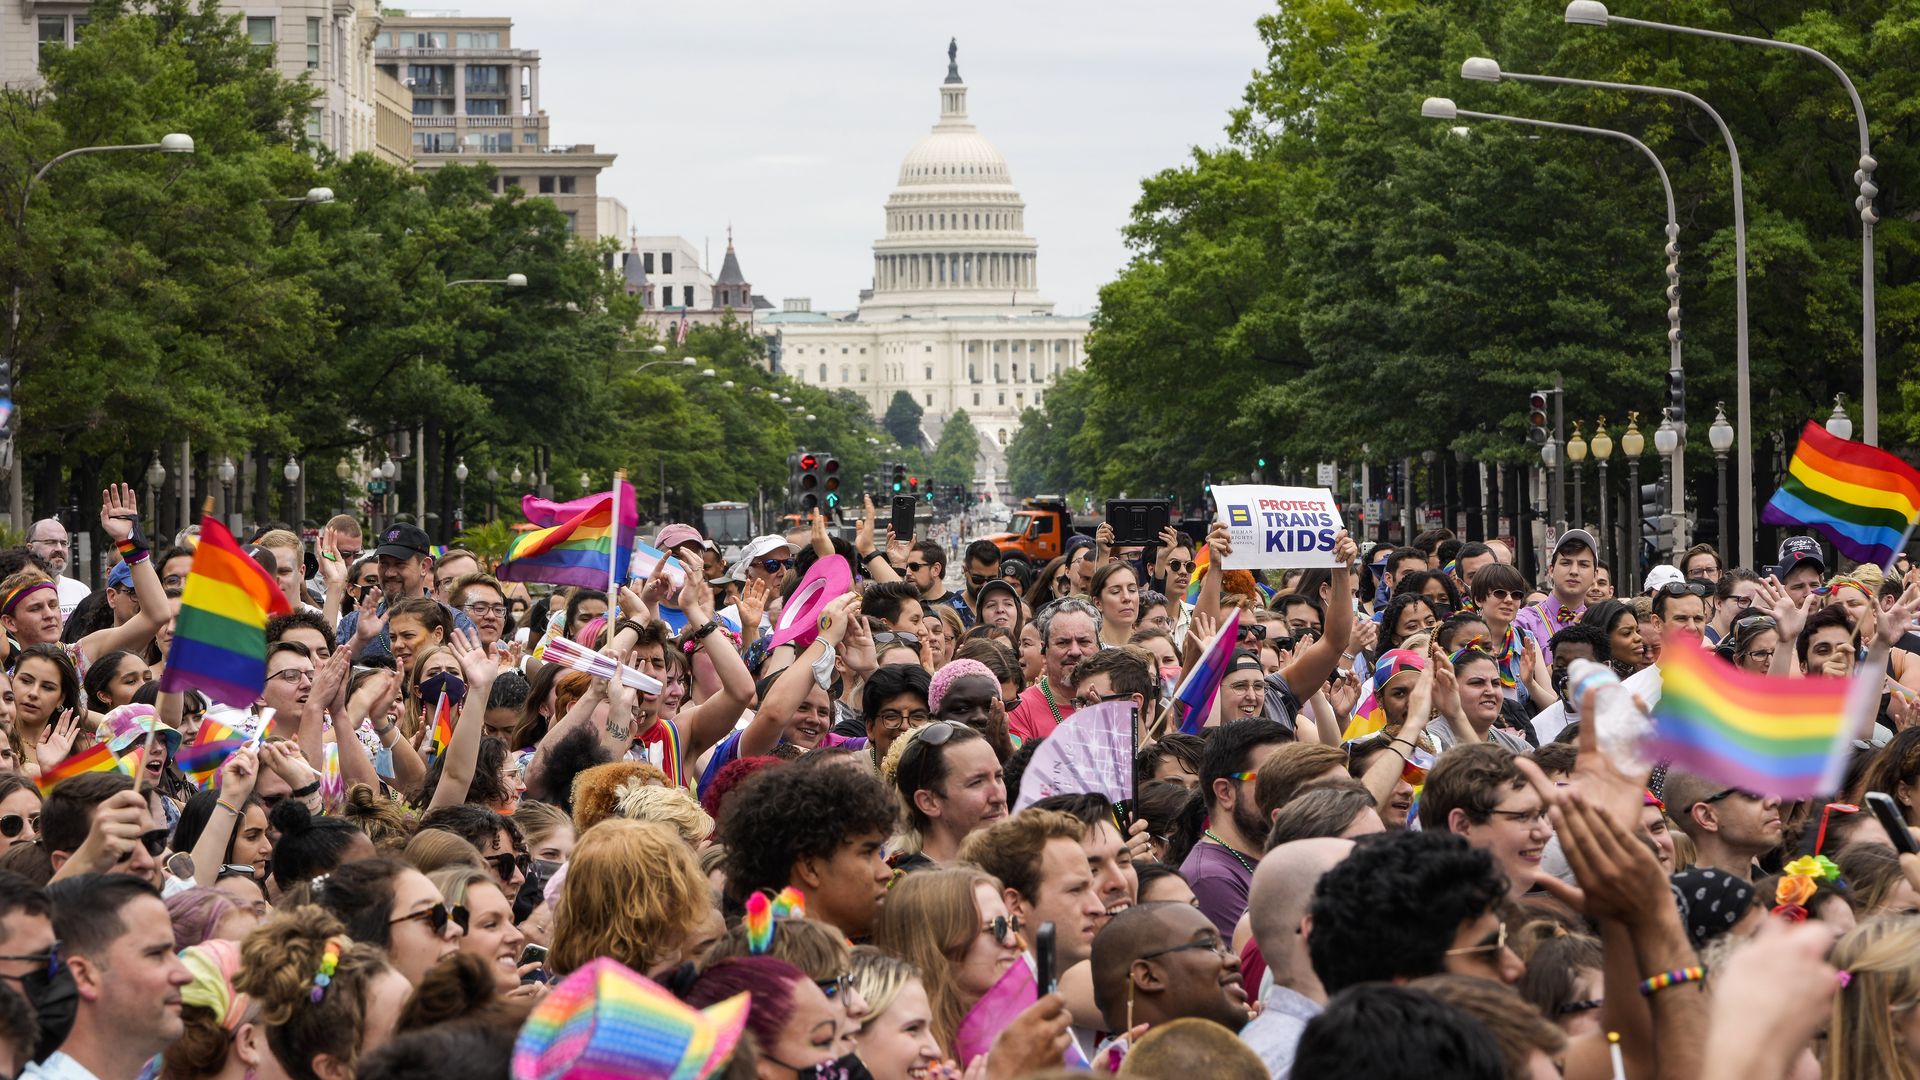 Members and allies of the LGBTQ community participate in the Pride Walk and Rally through downtown Washington, DC on June 12, 2021.